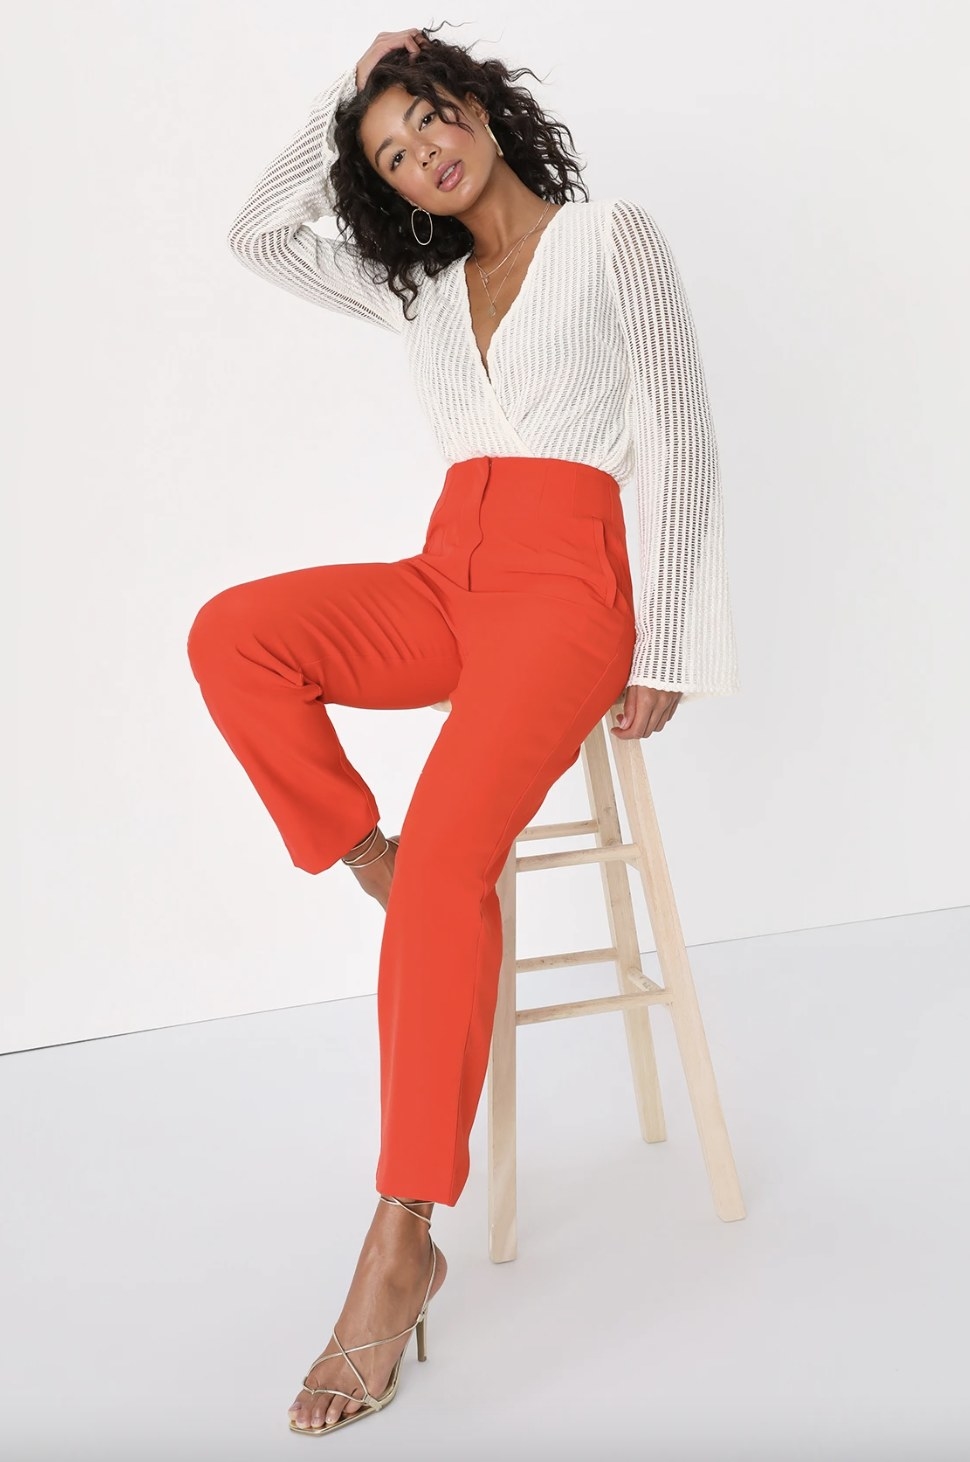 A model wearing the pants in a bright orange-red color